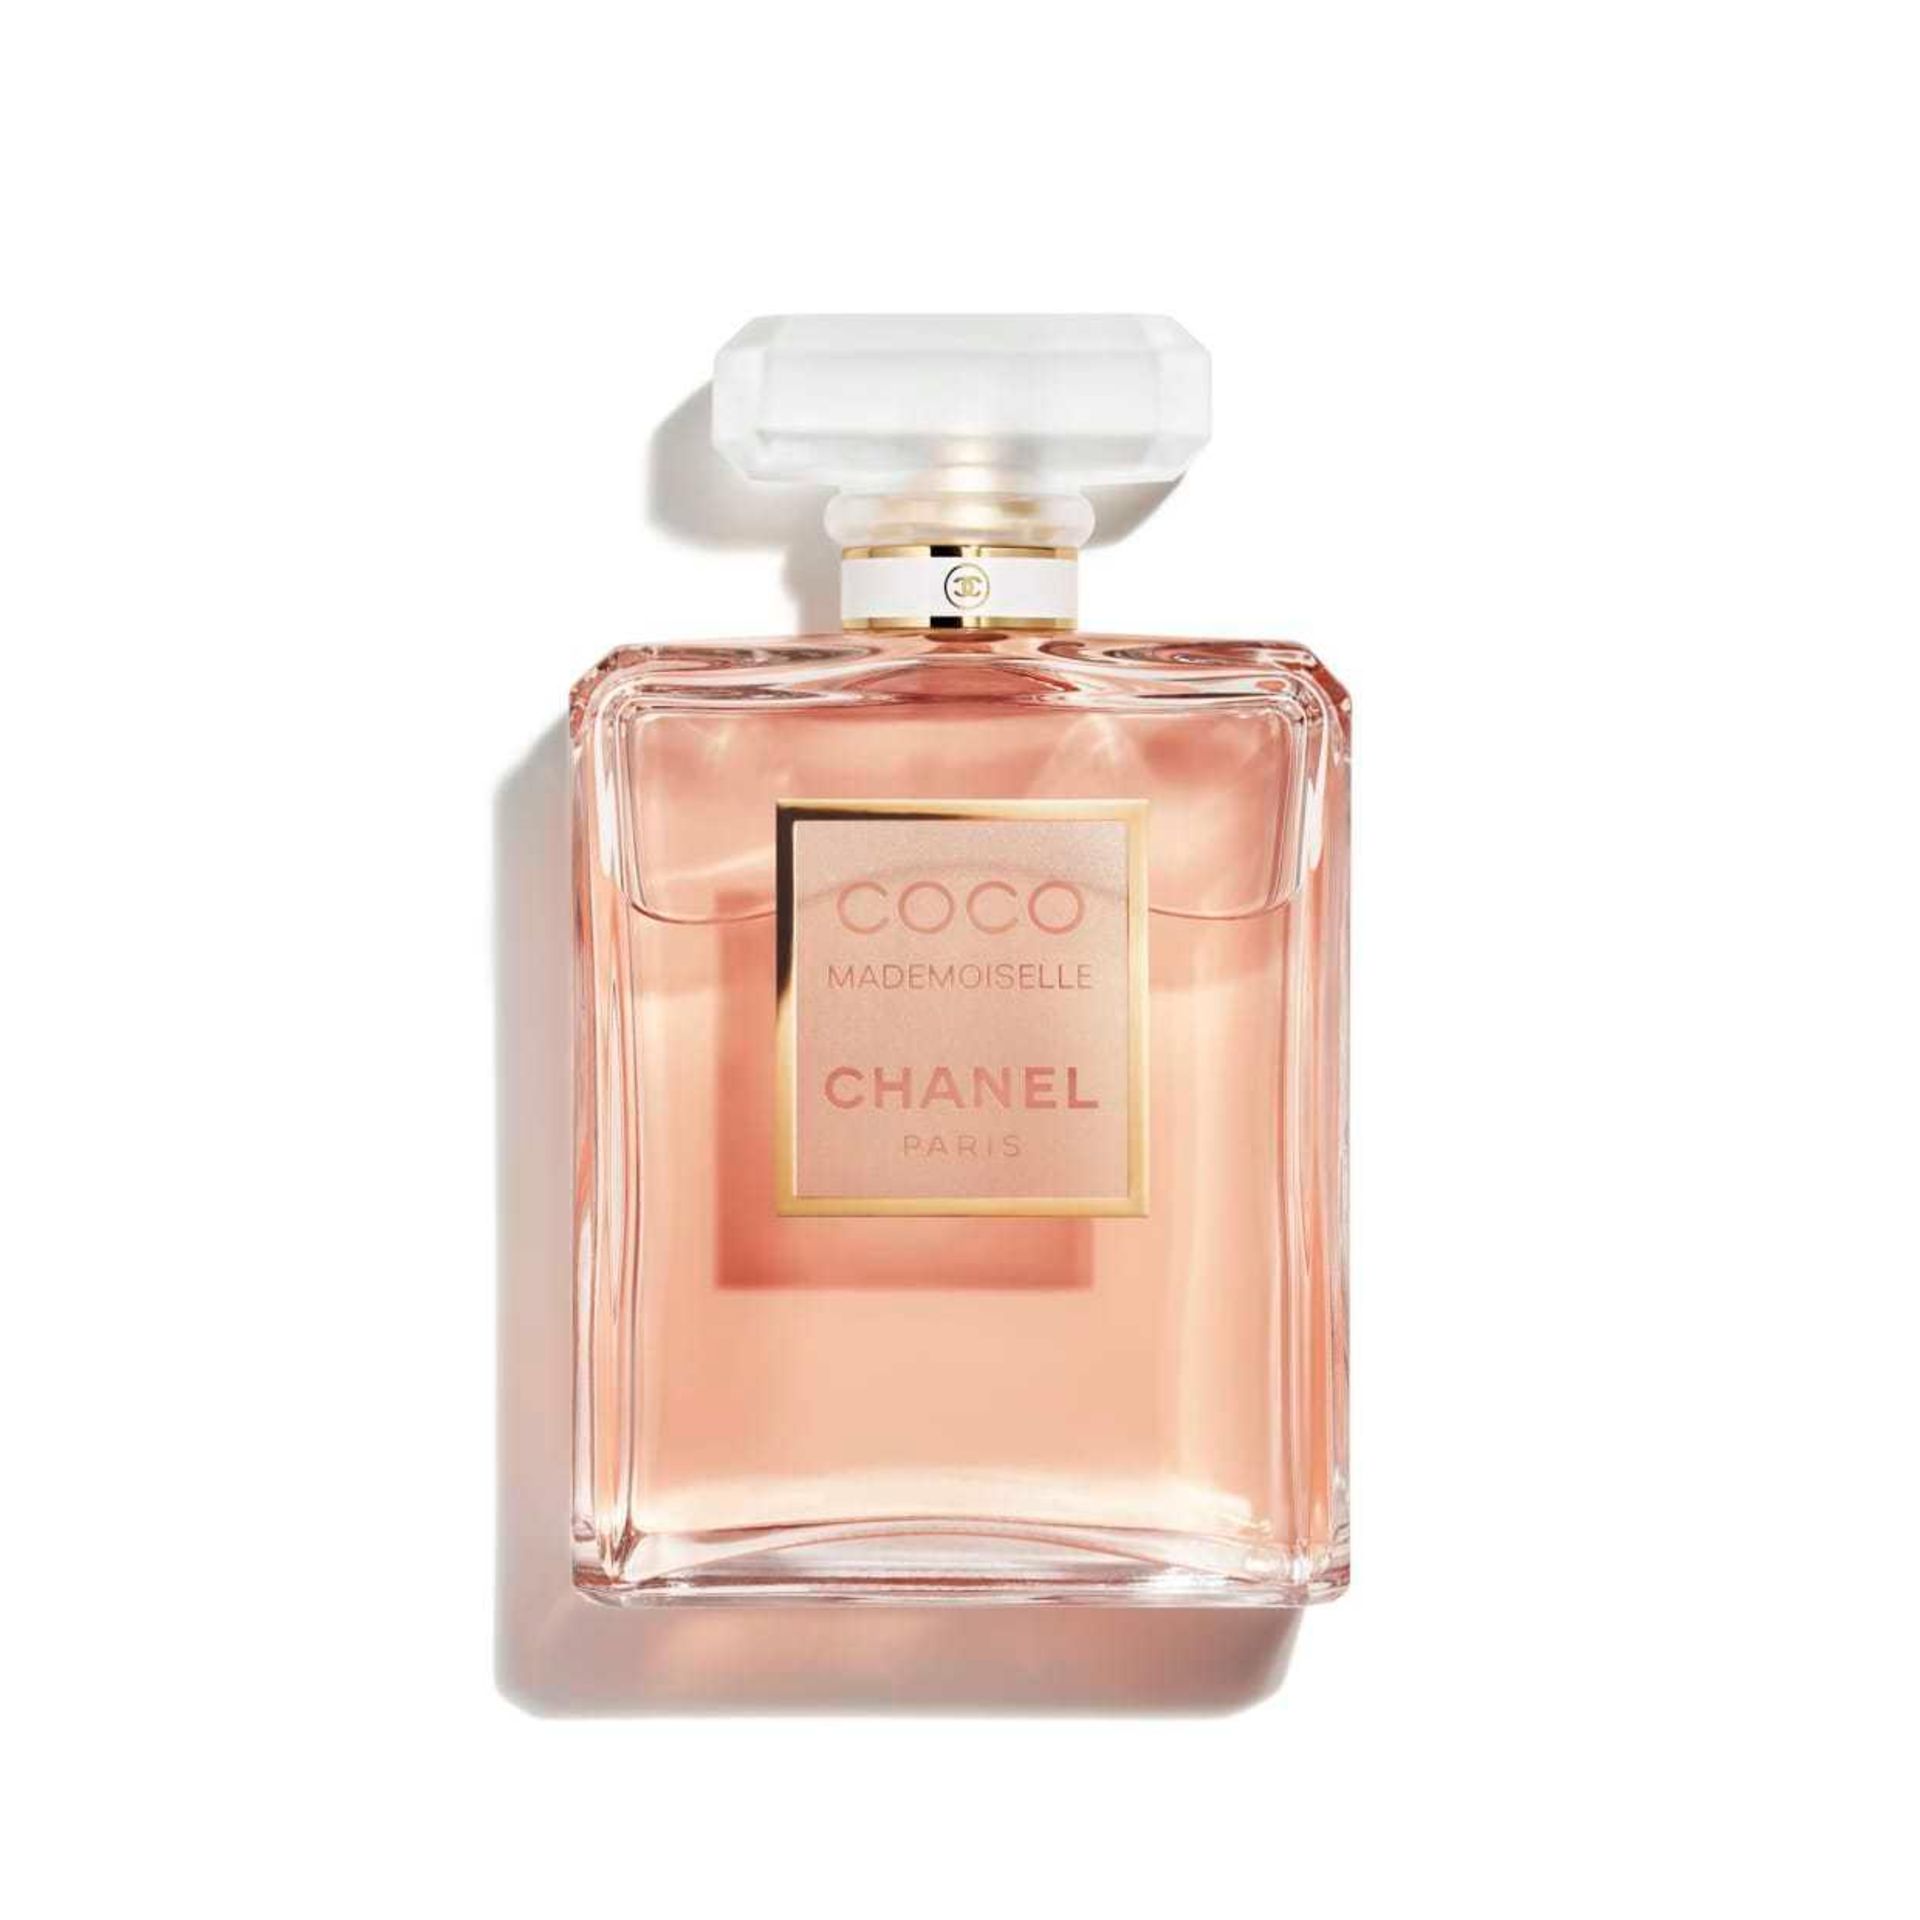 RRP £110 Brand New Boxed Full 100Ml Tester Bottle Of Coco Mademoiselle By Chanel Paris Perfume Spray